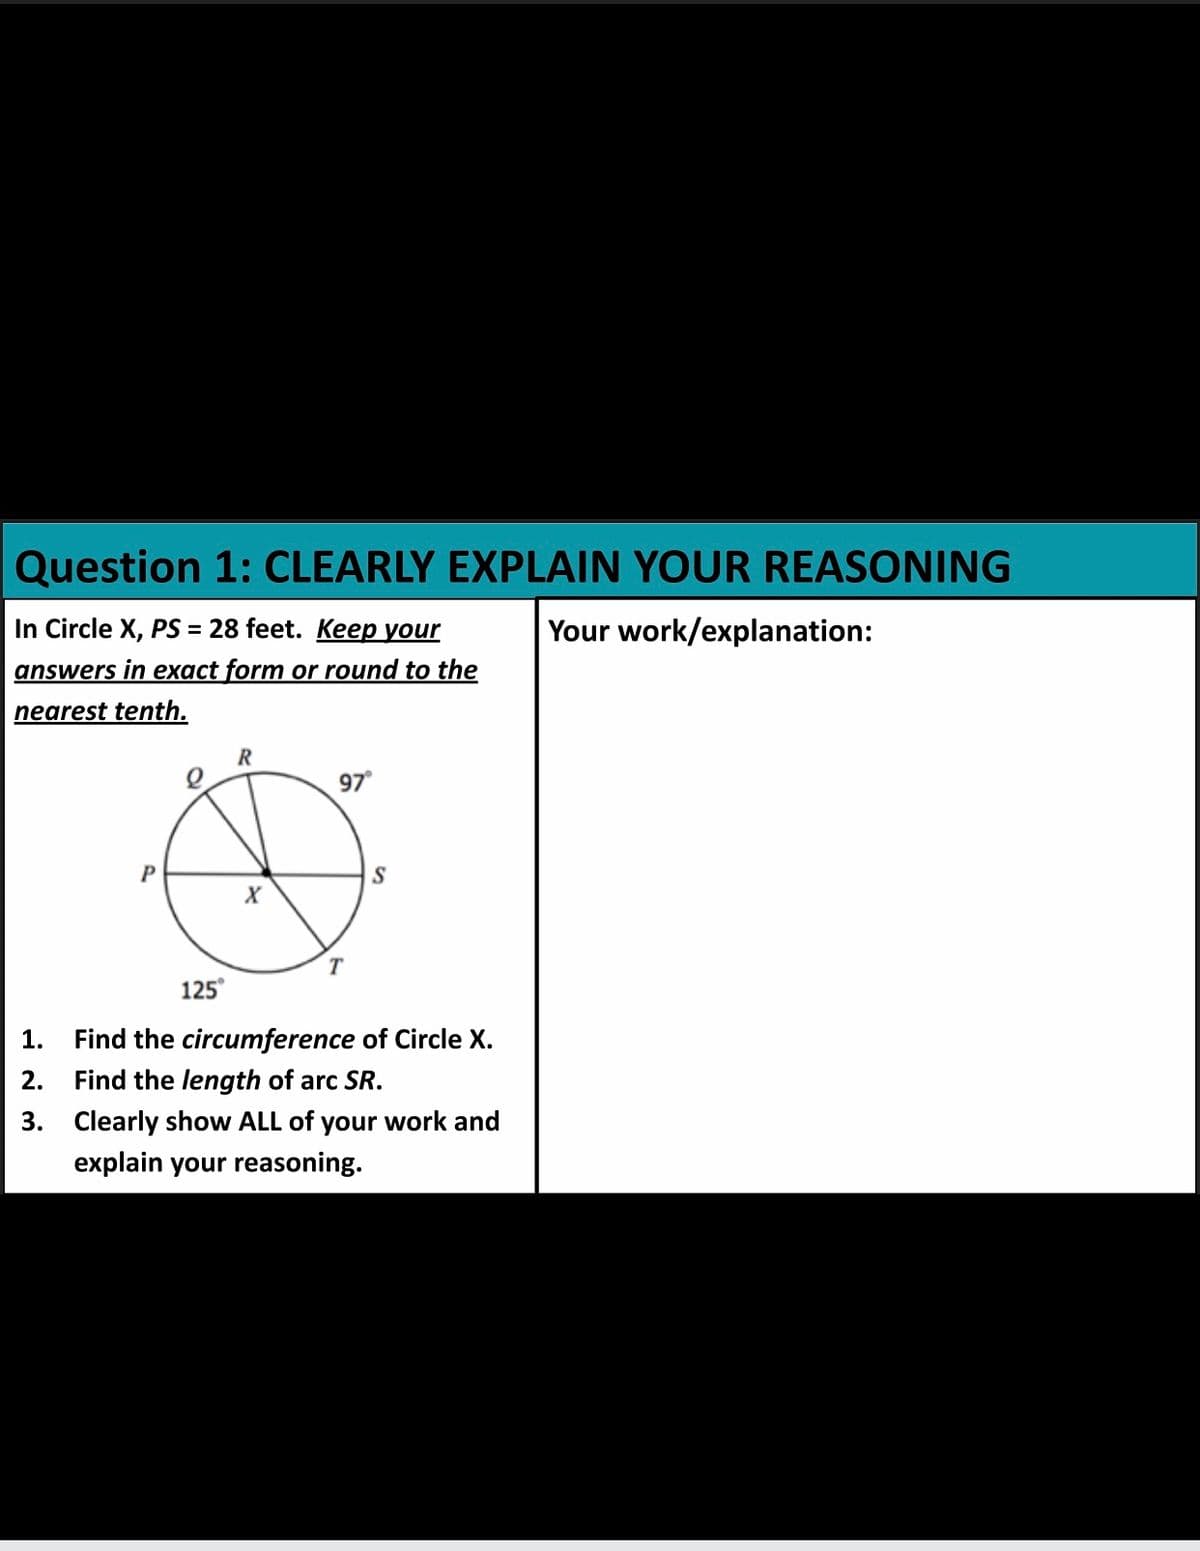 Question 1: CLEARLY EXPLAIN YOUR REASONING
In Circle X, PS = 28 feet. Keep your
Your work/explanation:
answers in exact form or round to the
nearest tenth.
97
X
125°
1.
Find the circumference of Circle X.
2.
Find the length of arc SR.
3. Clearly show ALL of your work and
explain your reasoning.
